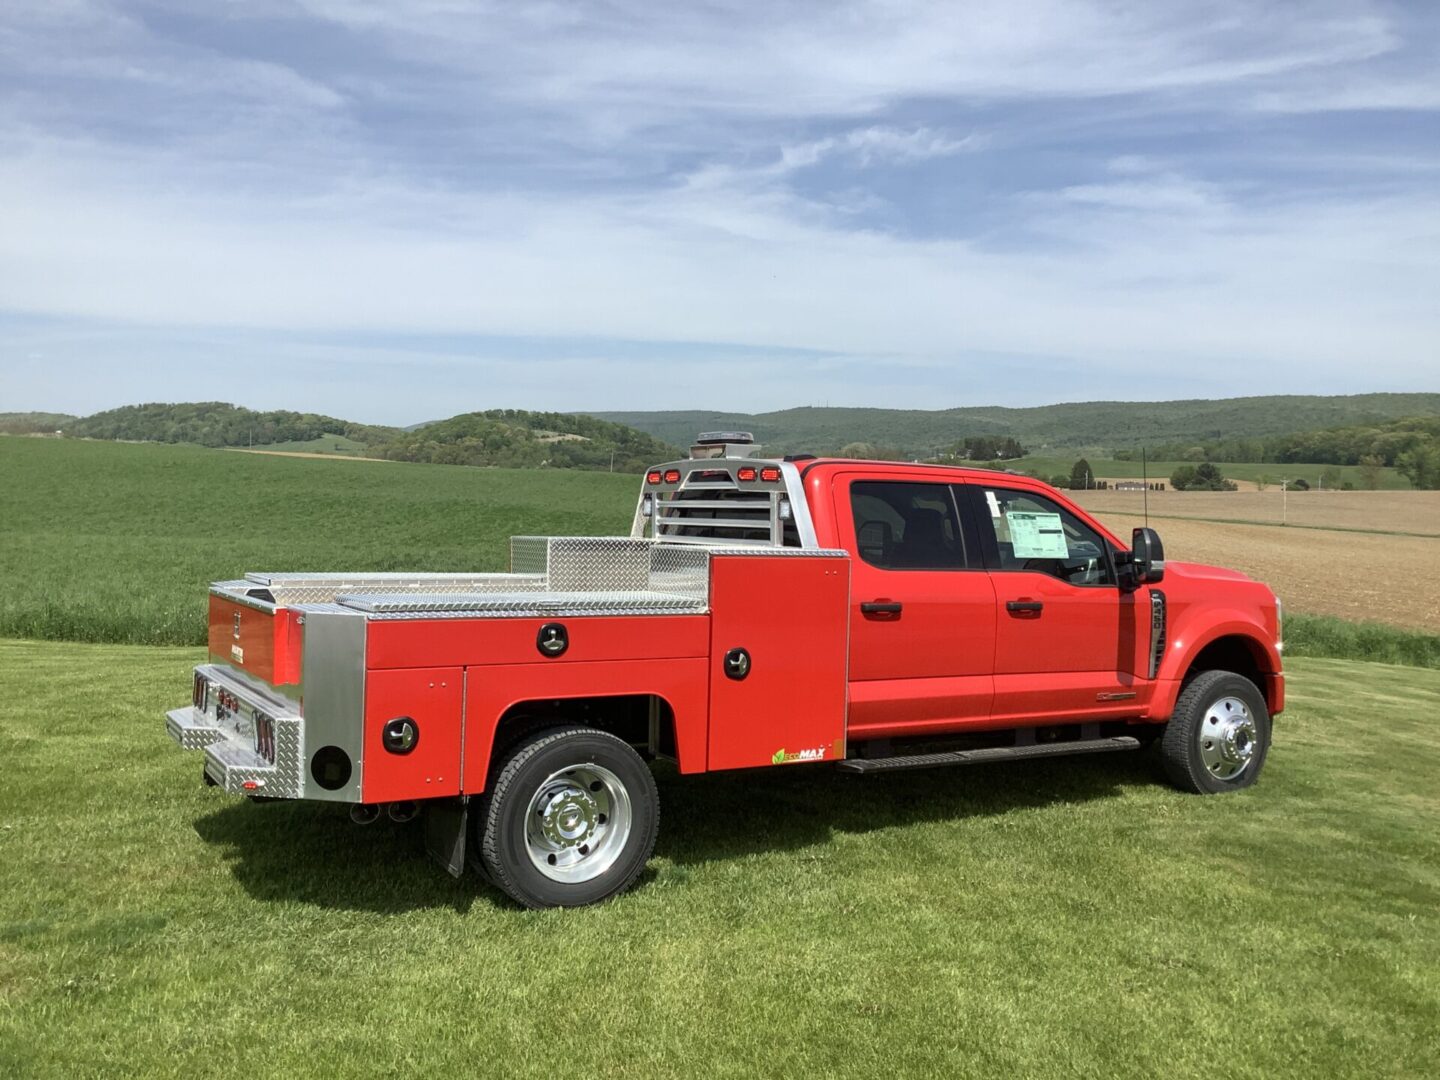 Red pickup truck with open bed storage parked in a green field with hills in the background.